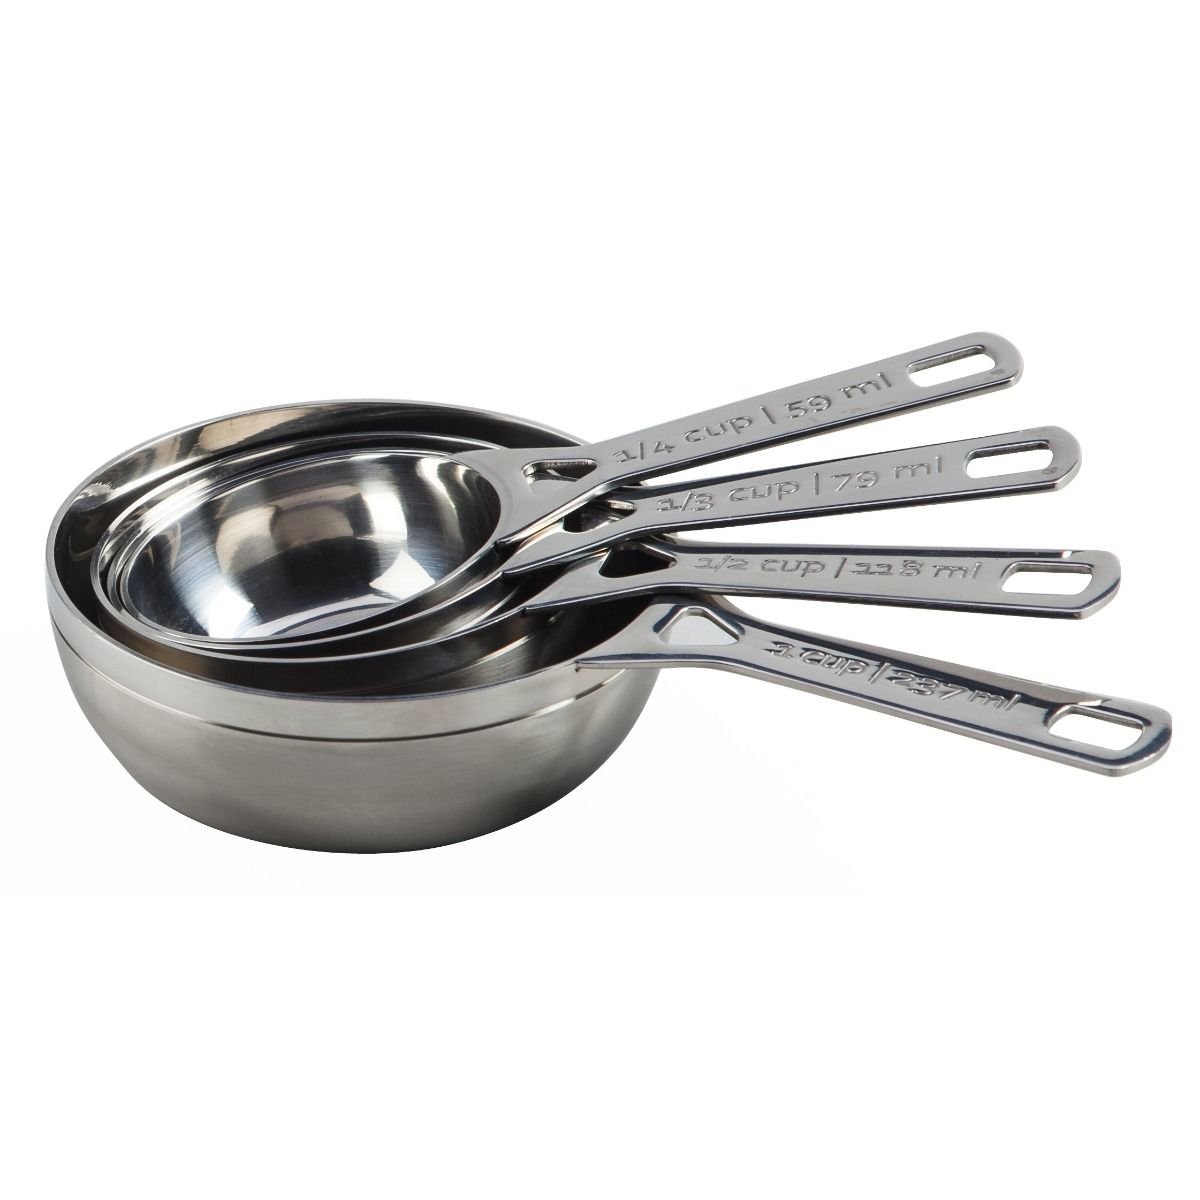 https://cdn.everythingkitchens.com/media/catalog/product/cache/70d878061ea71e5b62358b2b67547186/r/s/rs1771_measuring_cups_stainless_steel_ssa2530.jpg